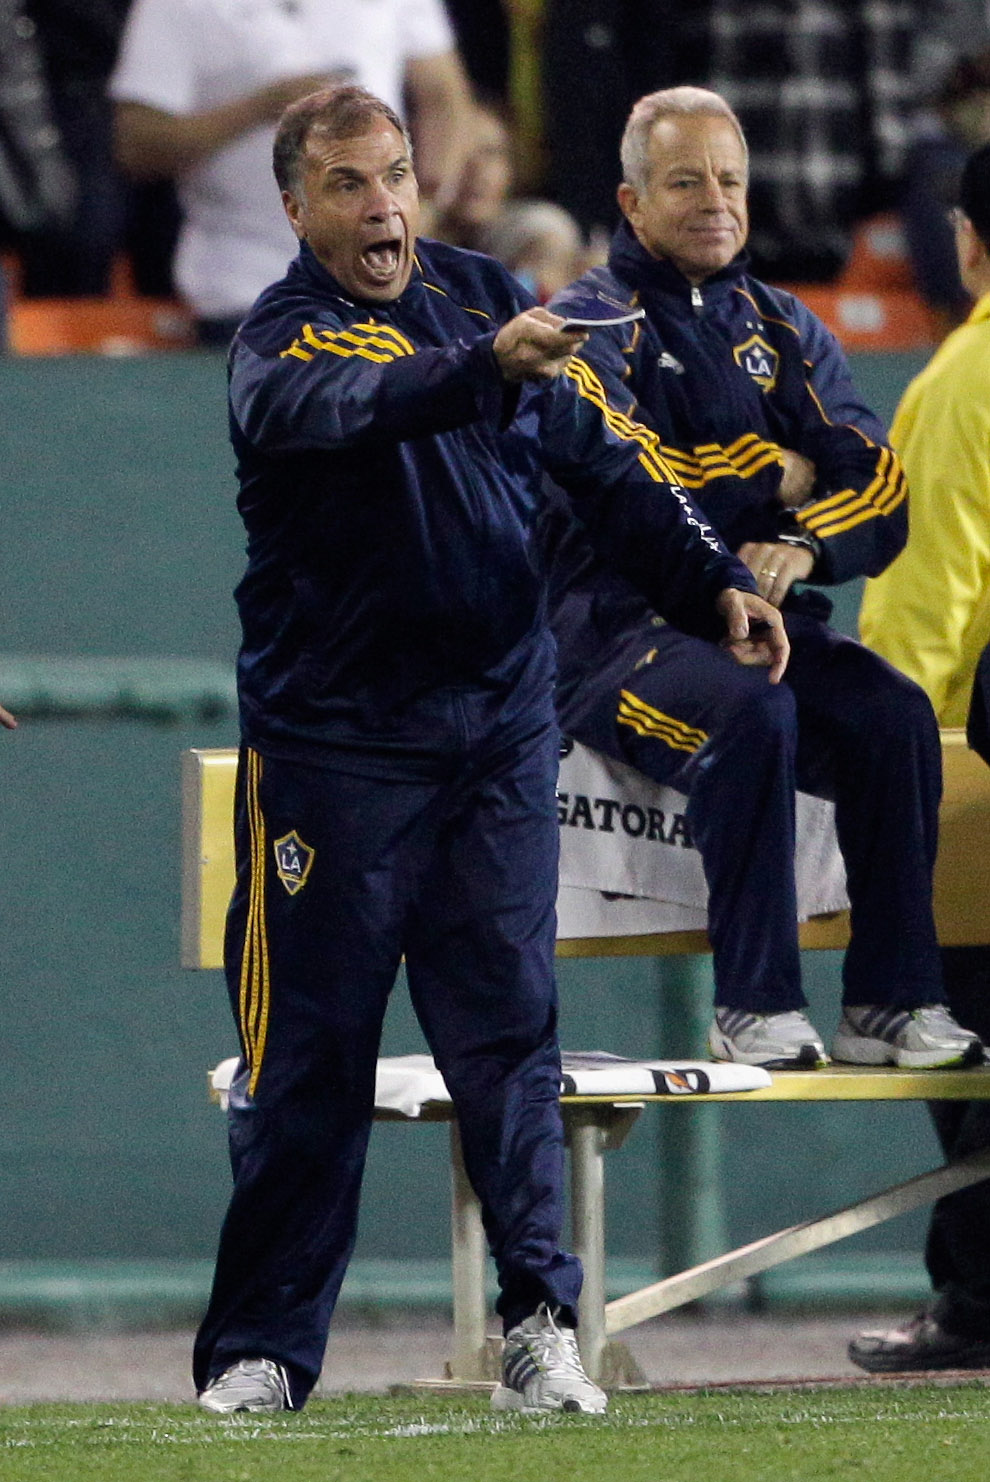 WASHINGTON, DC - APRIL 09: Bruce Arena head coach of the Los Angeles Galaxy yells from the sidelines against the D.C. United during the second half at RFK Stadium on April 9, 2011 in Washington, DC. The game ended in a 1-1  draw. (Photo by Rob Carr/Getty